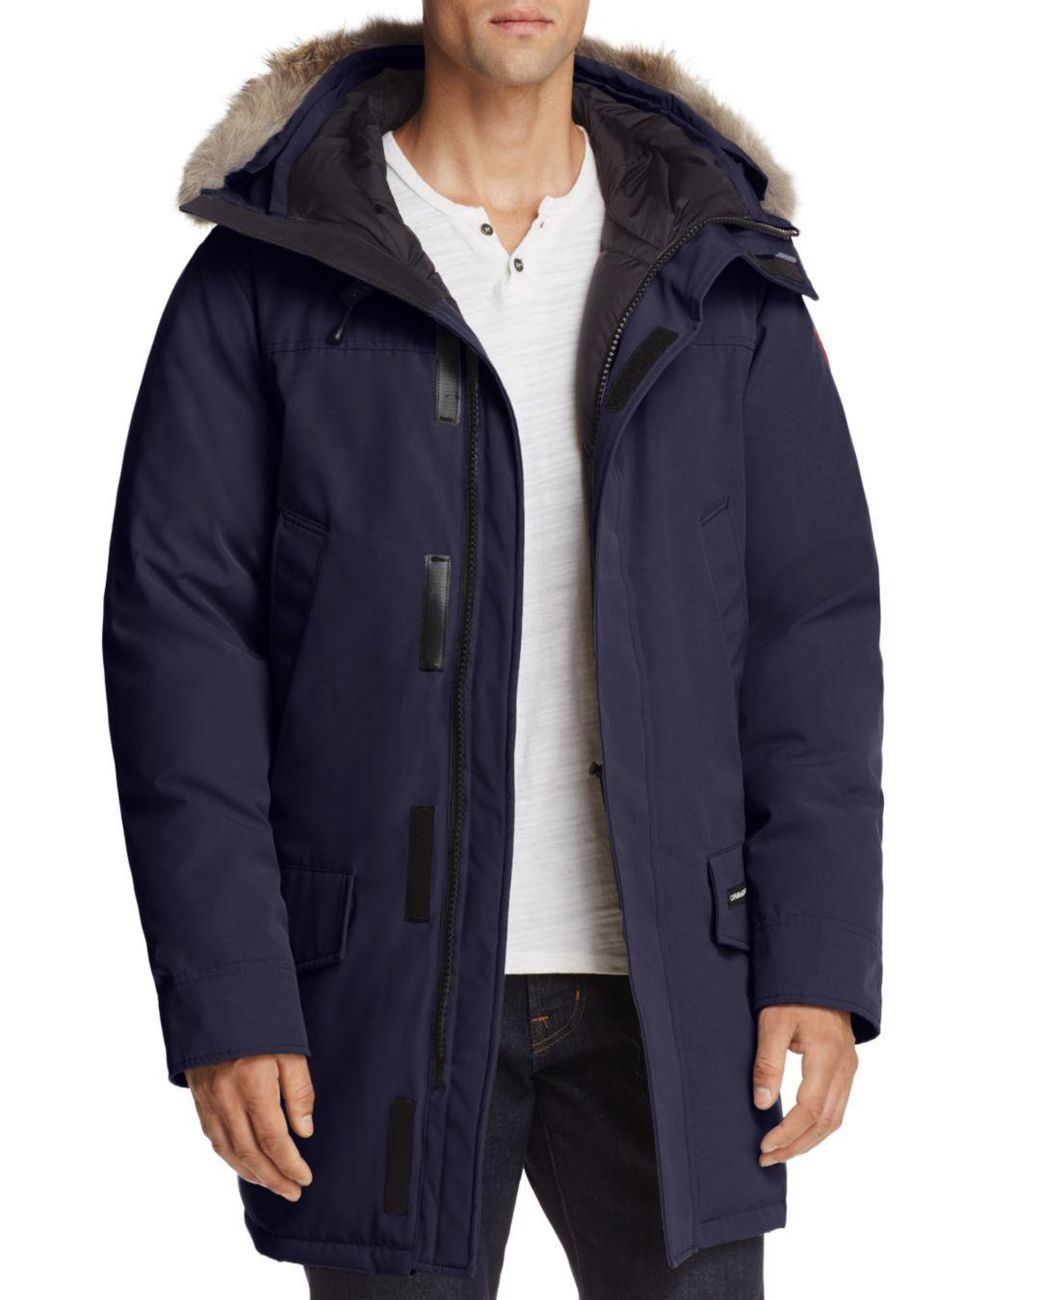 Lyst - Canada Goose Langford Parka With Fur Hood in Blue for Men